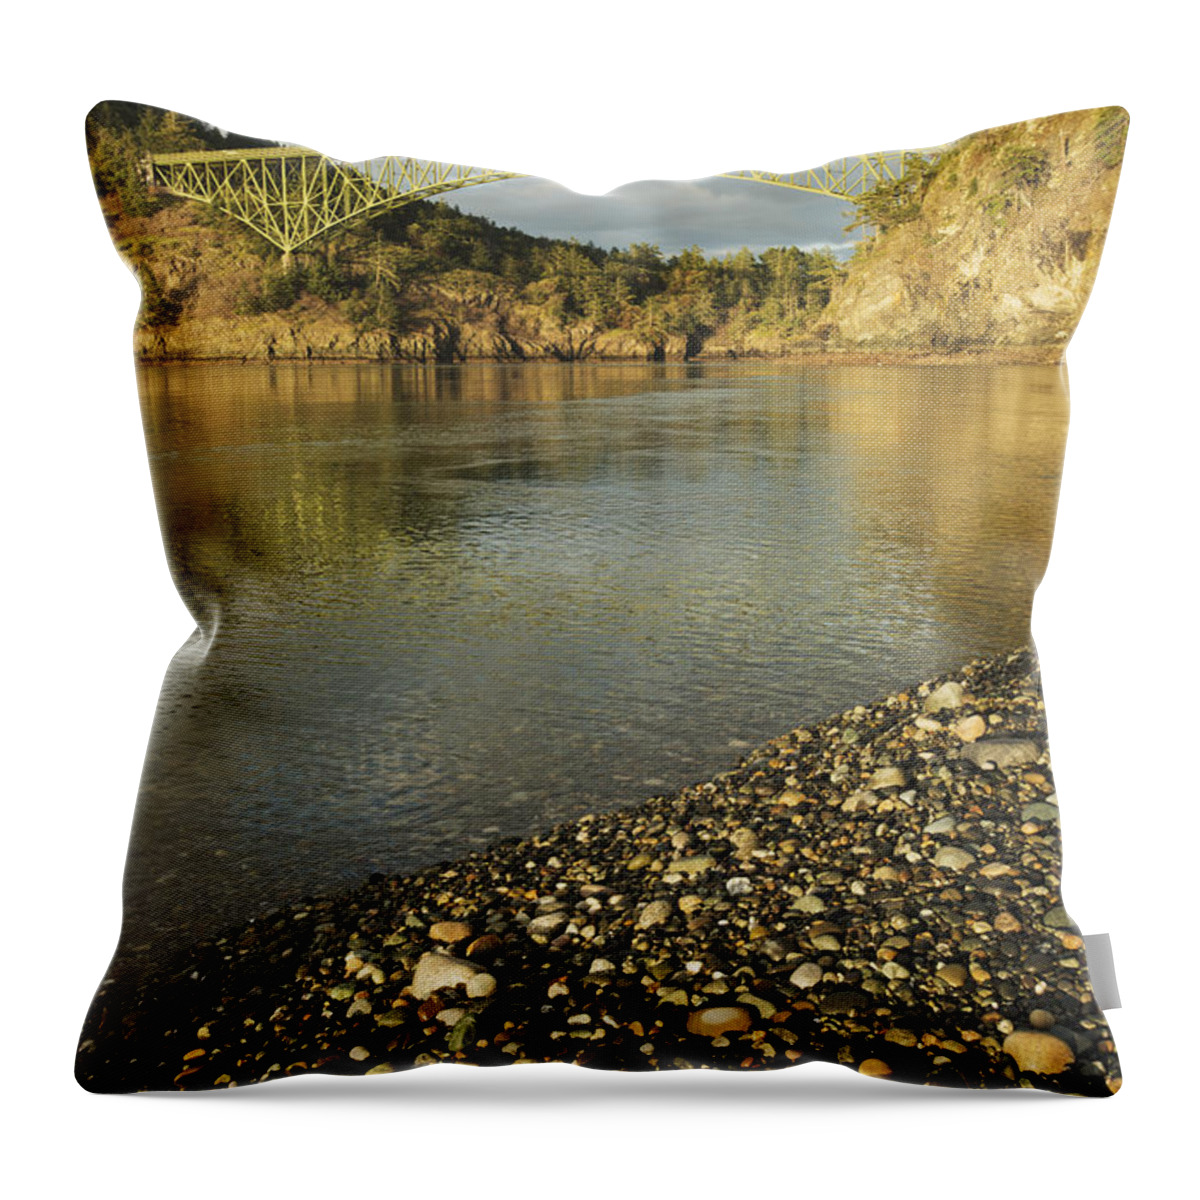 Feb0514 Throw Pillow featuring the photograph Deception Pass Bridge Whidbey Isl by Kevin Schafer